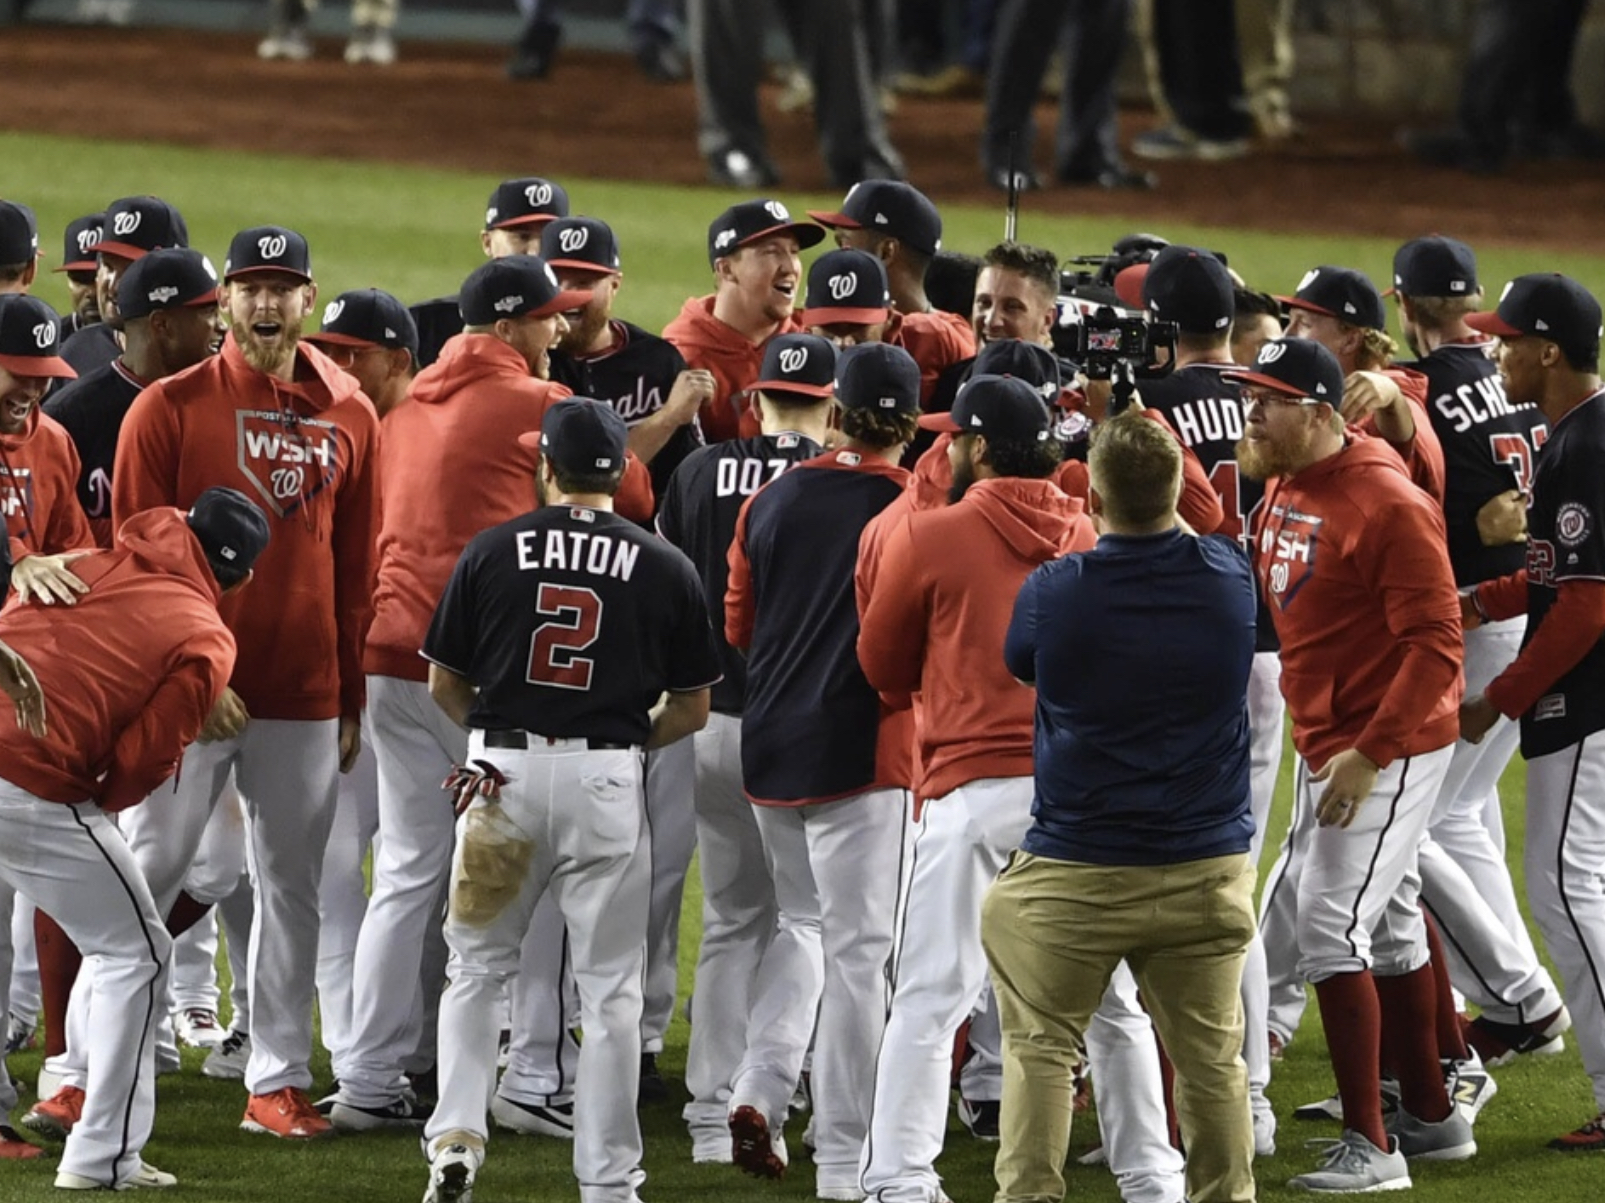 Average cost of Nationals’ World Series ticket hits $1,225